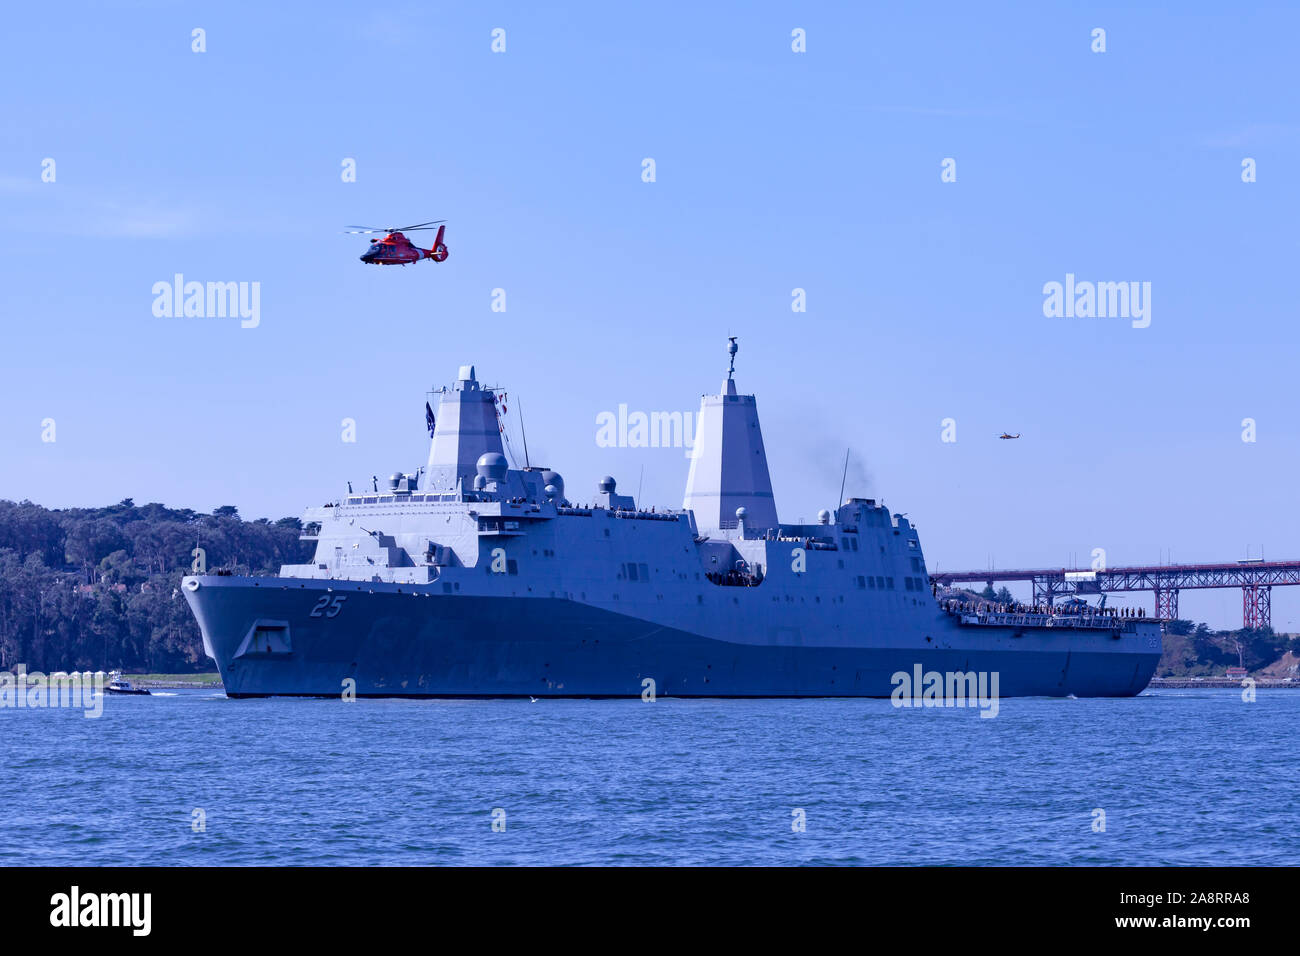 San Antonio-class amphibious transport dock USS Somerset (LPD-25) enters San Francisco Bay as it leads the Parade of Ships during the 2019 San Francis Stock Photo